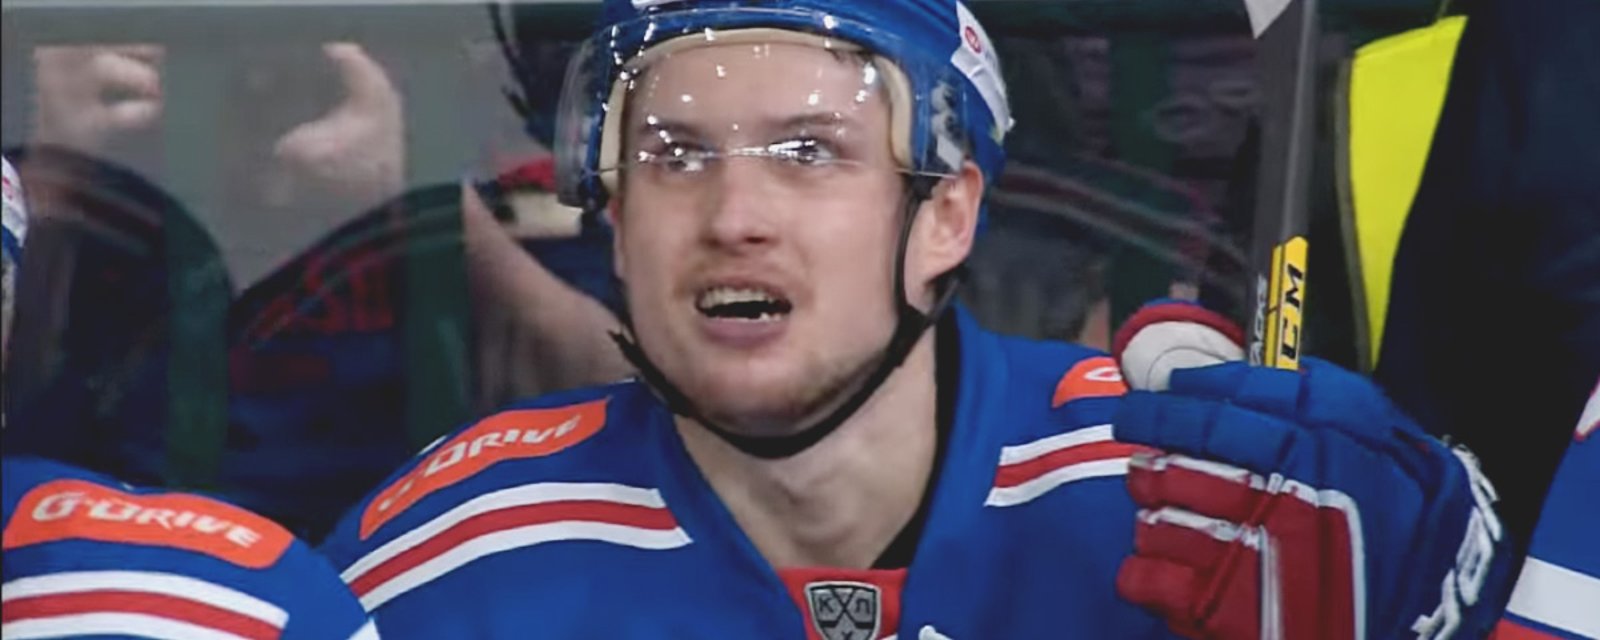 Rumored KHL player tearing the league down also scored 3 last night.